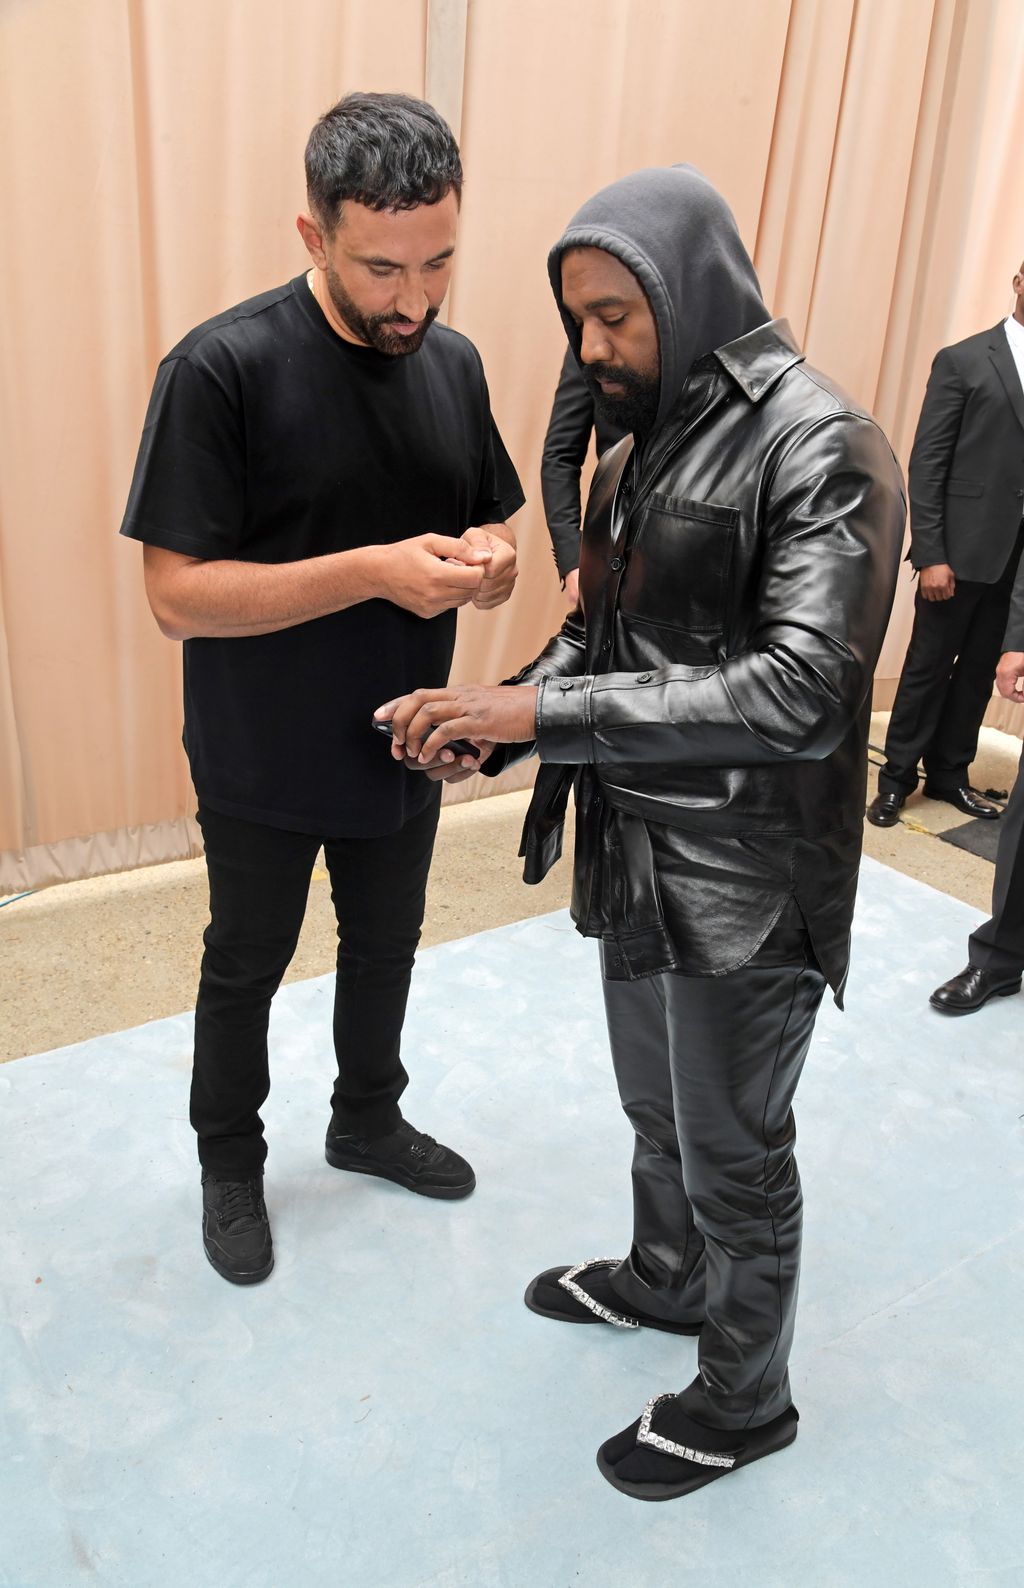 LONDON, ENGLAND - SEPTEMBER 26: CCO of Burberry Riccardo Tisci and Kanye West pose backstage at the Burberry Spring/Summer 2023 runway show in Bermondsey on September 26, 2022 in London, England. (Photo by David M. Benett/Dave Benett/Getty Images for Burberry)